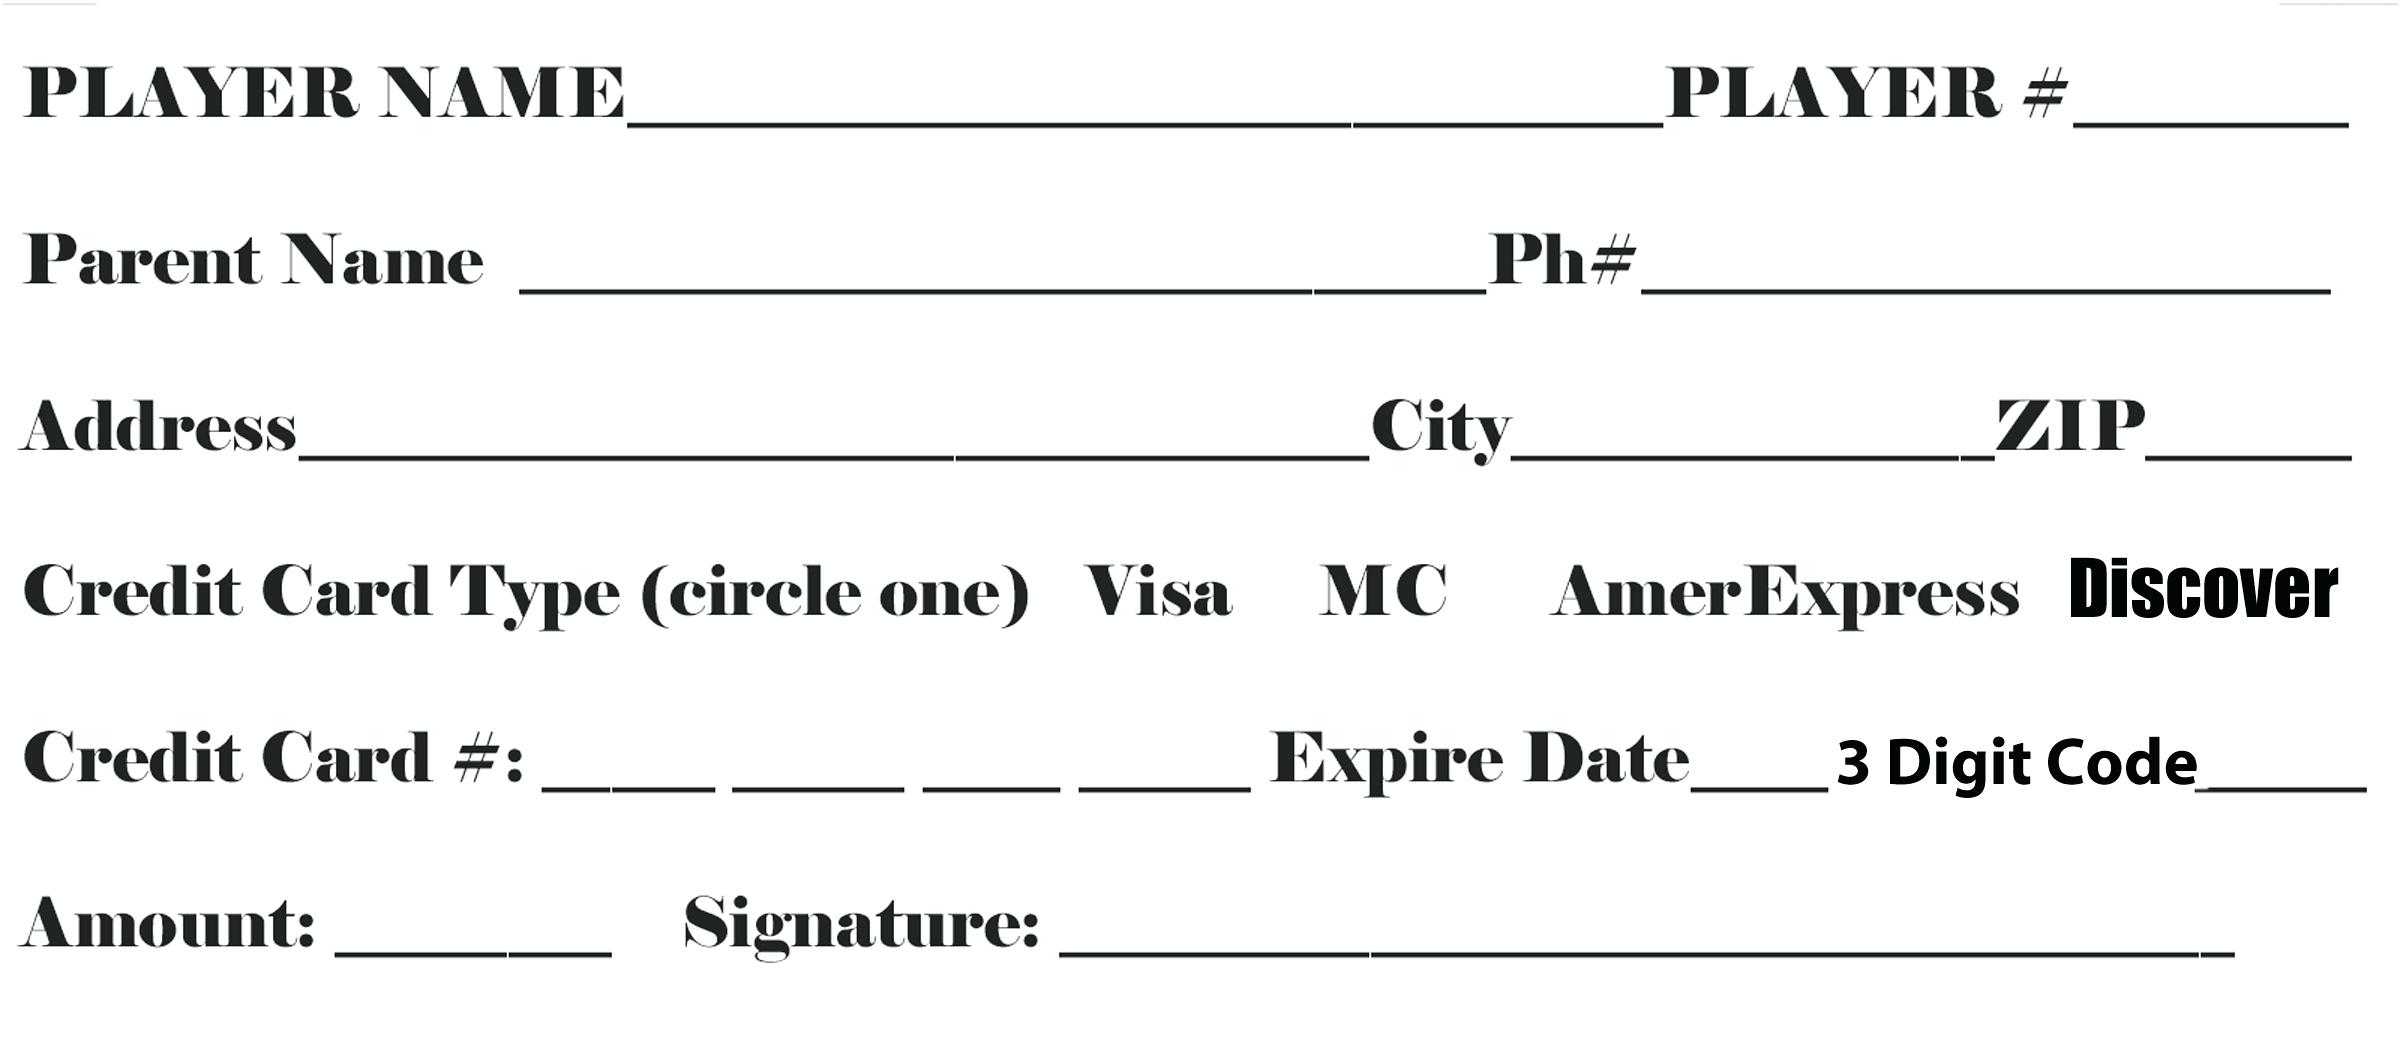 Deposit Forms Cash Credit Debit Or Financial Services Card With Credit Card Payment Slip Template